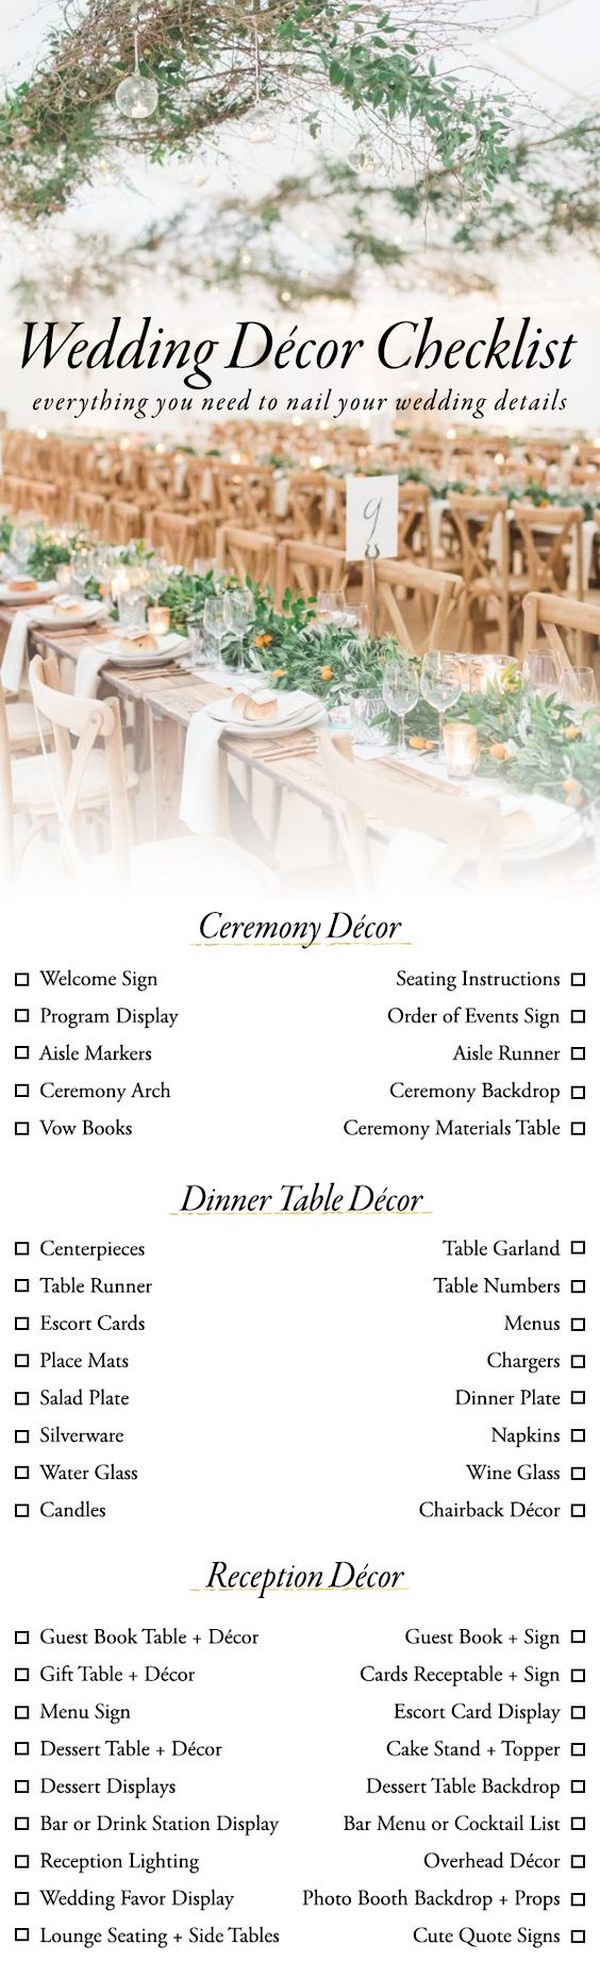 Use This Wedding Décor Checklist to Help You Nail Every Detail